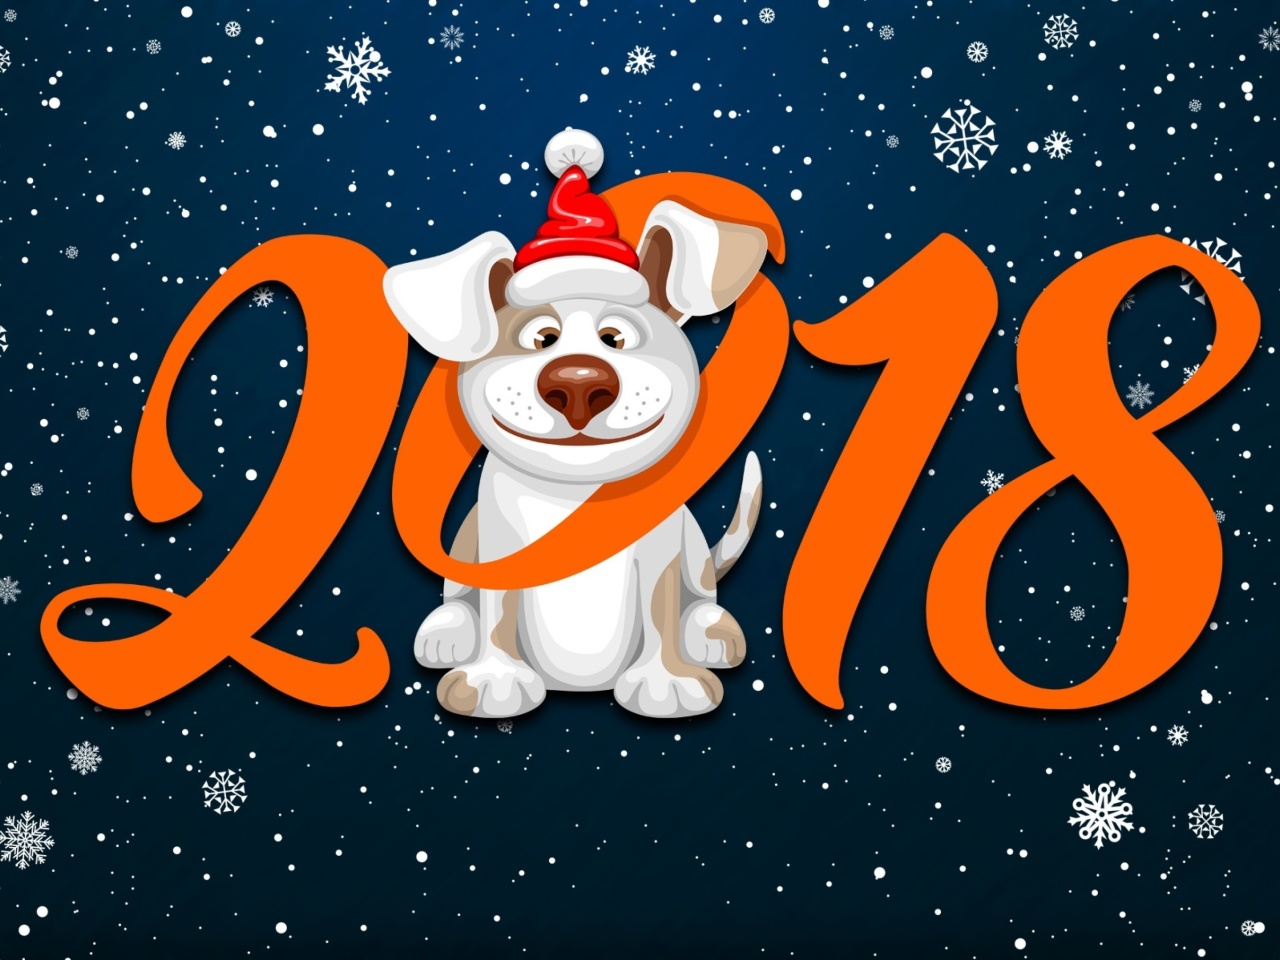 New Year Dog 2018 with Snow wallpaper 1280x960